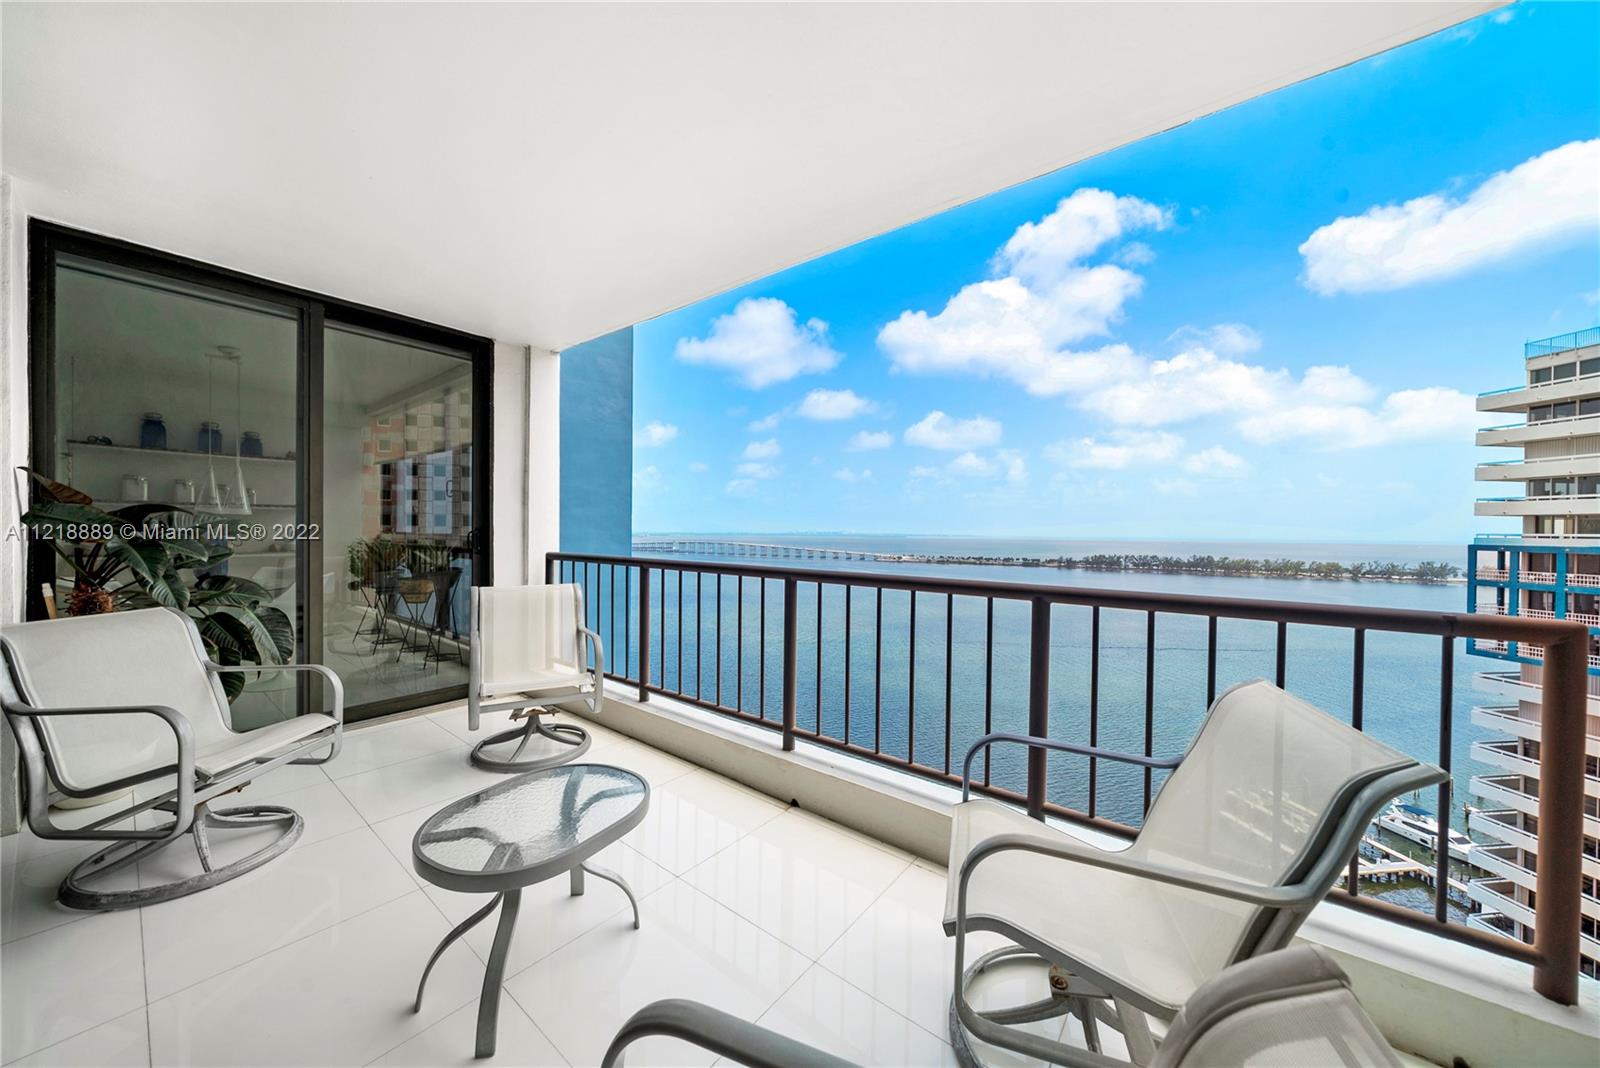 Beautiful residence at Villa Regina in Brickell, with only 3 units per floor and amazing views of Miami & the Bay! Located in the East Wing, this 2 BD / 3BA unit boasts a foyer entry with double doors, gorgeous white  glass tile floors, impact windows & doors, large living room, & separate dining room. The primary suite boasts walk-in closets, his & her bathroom, & stunning views of Brickell. Amenities include a guarded gate, 24-hour concierge & security, pool & Jacuzzi, BBQ area, fully equipped gym w/ sauna & steam room, extra-large party room, & children's playroom—walking distance to Publix, Brickell City Center, Mary Brickell, Metrorail, and St Jude Church. Near Bayside shops, MTX Arena, Adrianne Arsht Performing Arts, Perez & Frost Museums. Boat Slips Available.